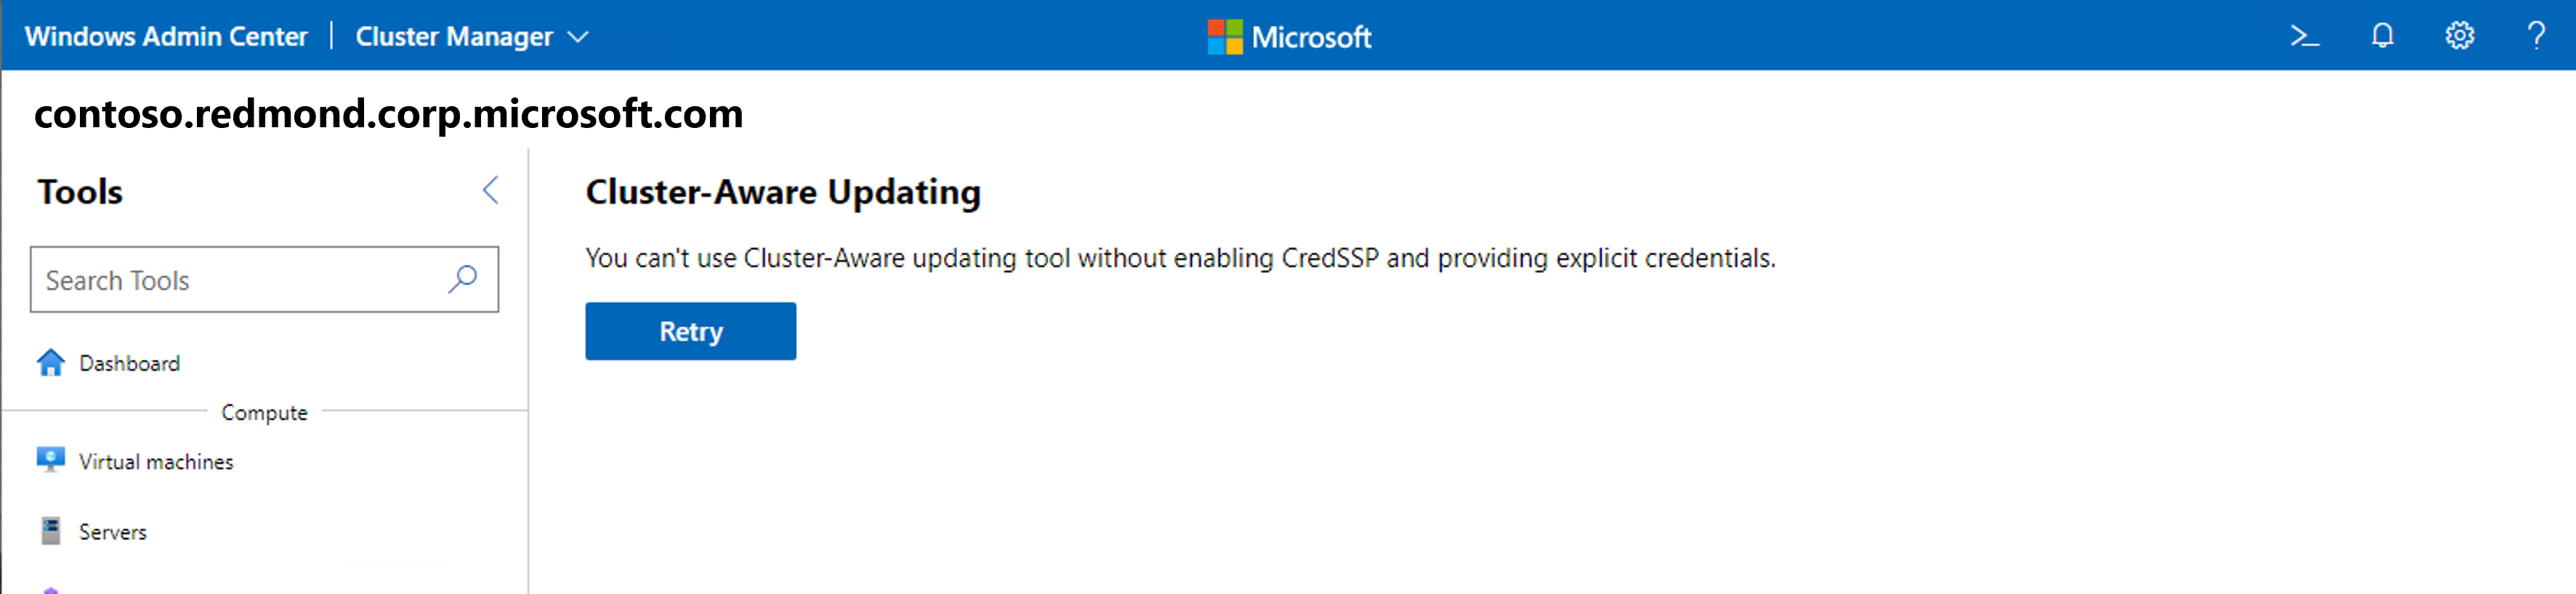 Screenshot of Updates tool using Cluster-Aware Updating with Cred S S P error in Windows Admin Center.